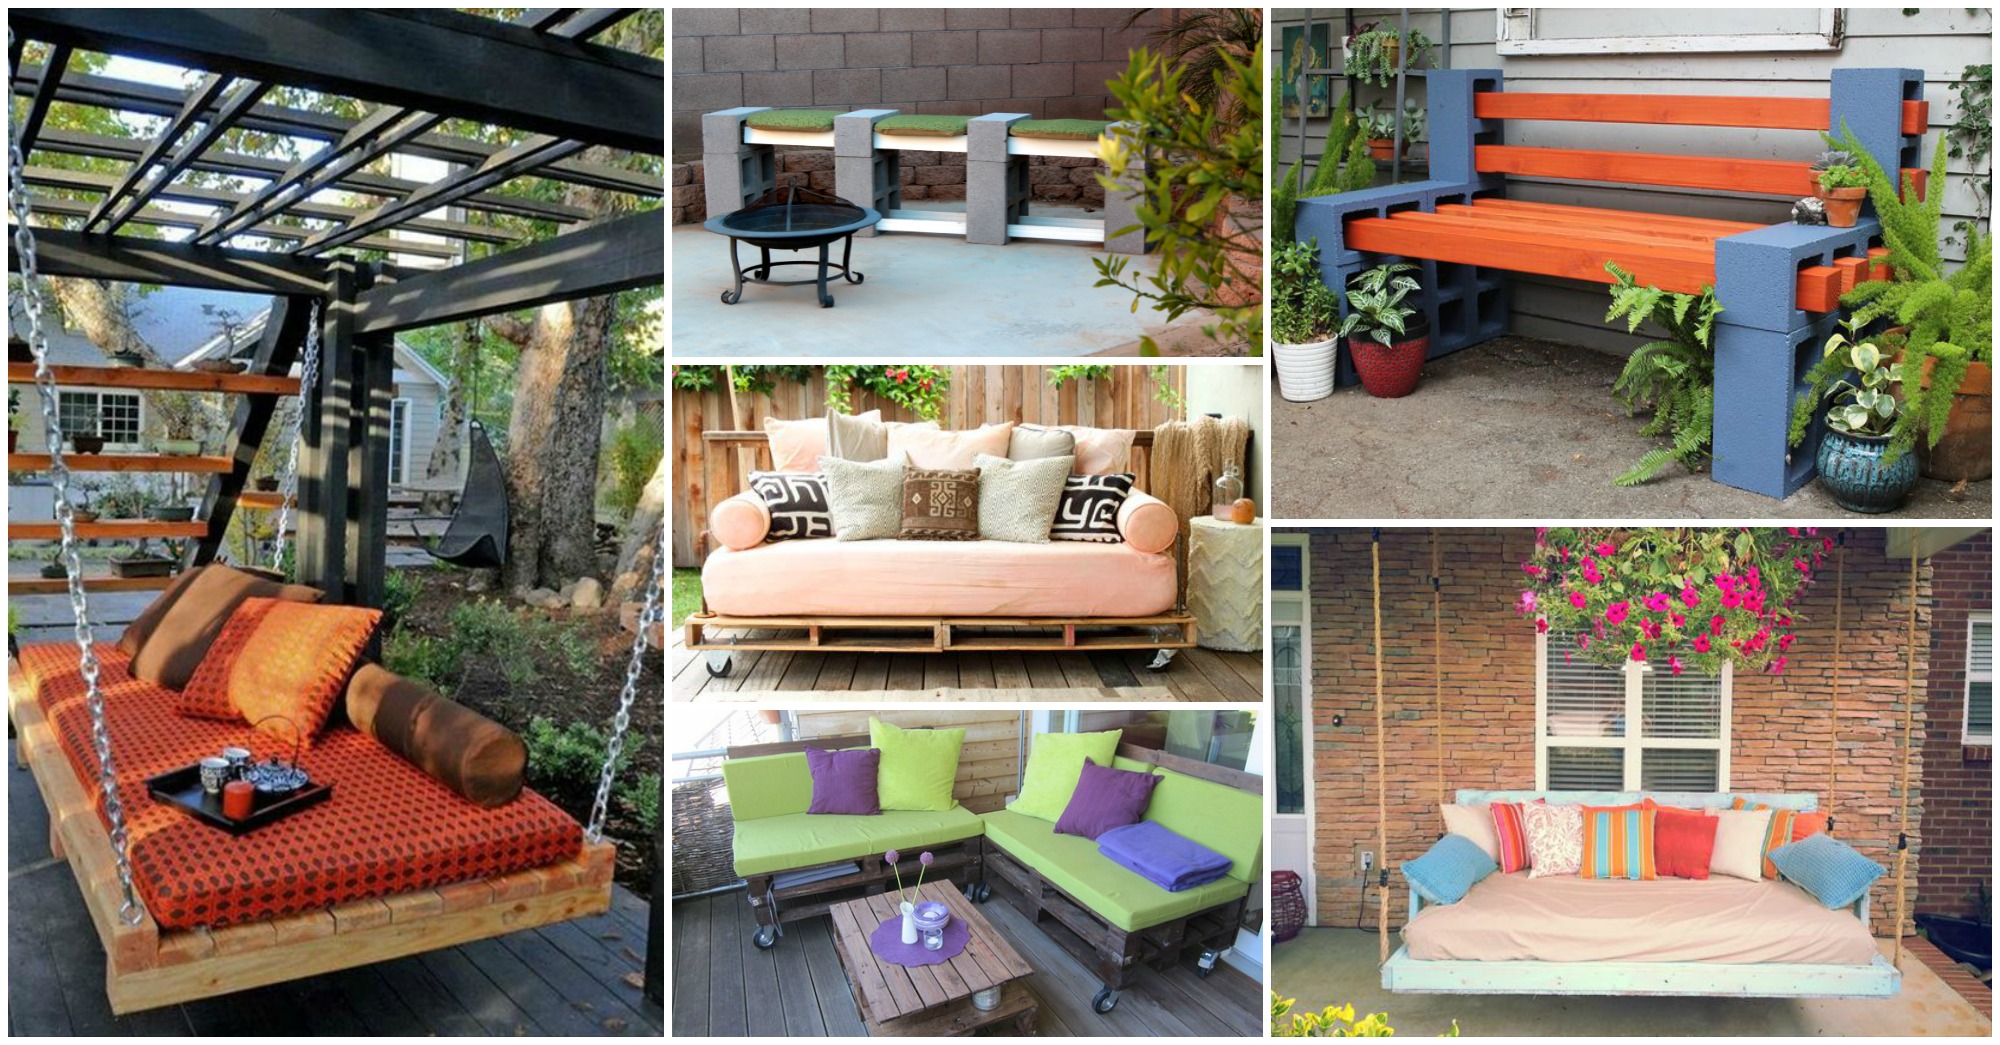 Outdoor furniture ideas for your backyard setting